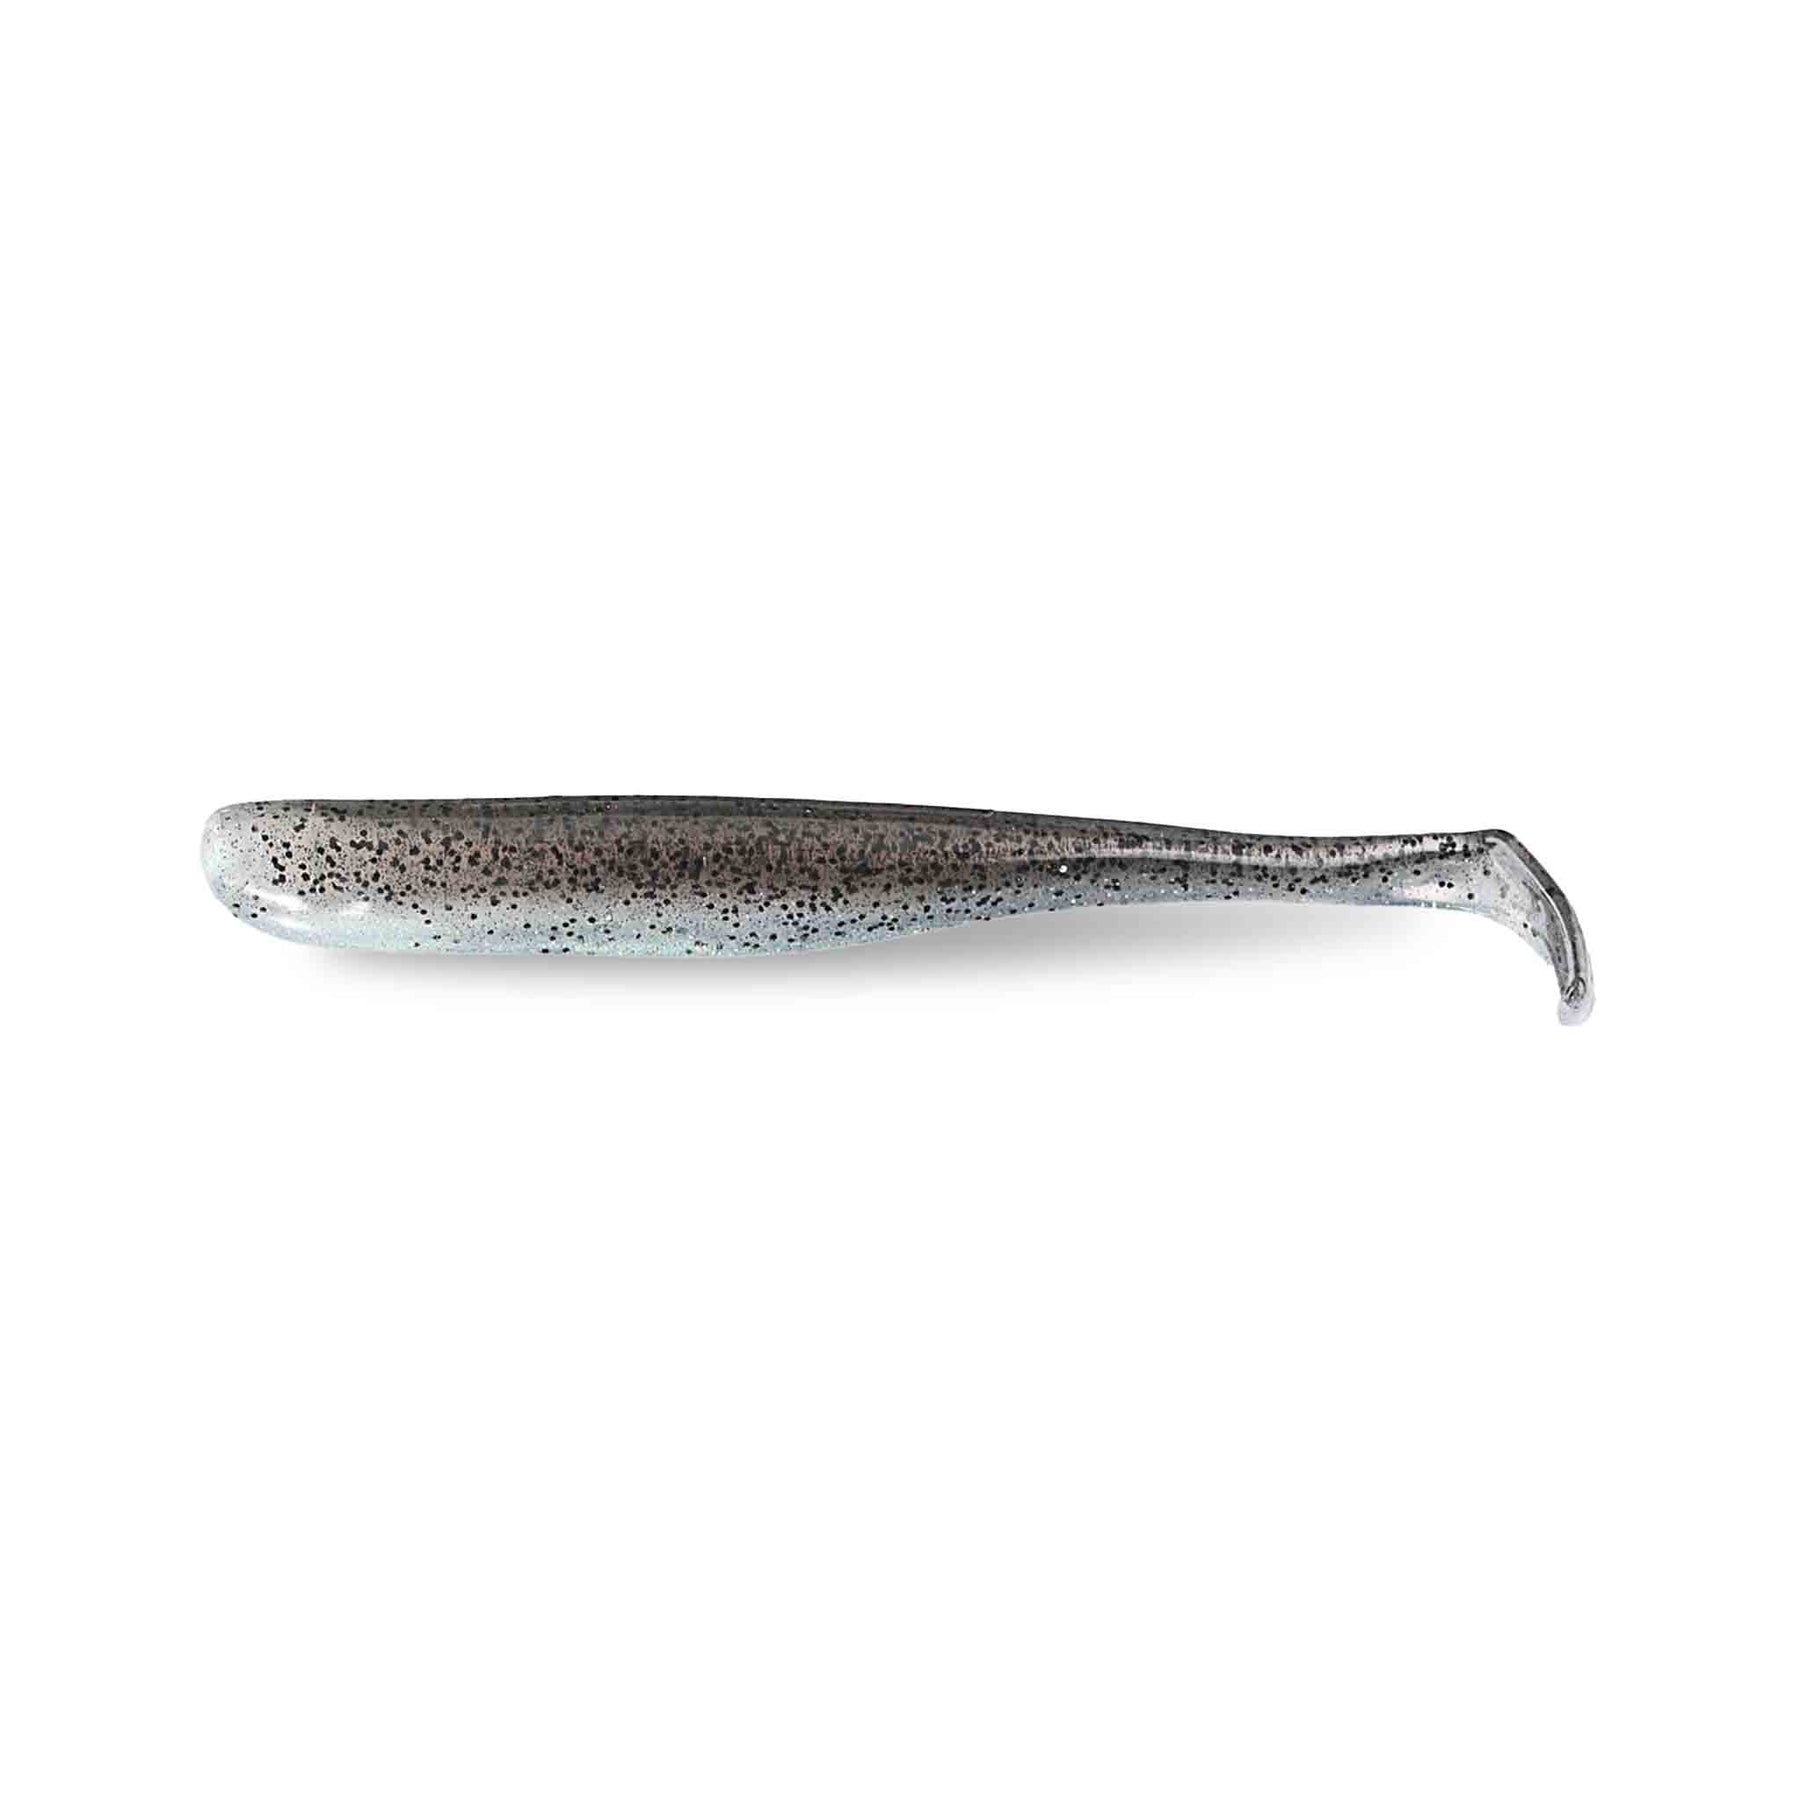 View of Rubber Z-Man Mag SwimZ 8" Swimbait Bad Shad available at EZOKO Pike and Musky Shop